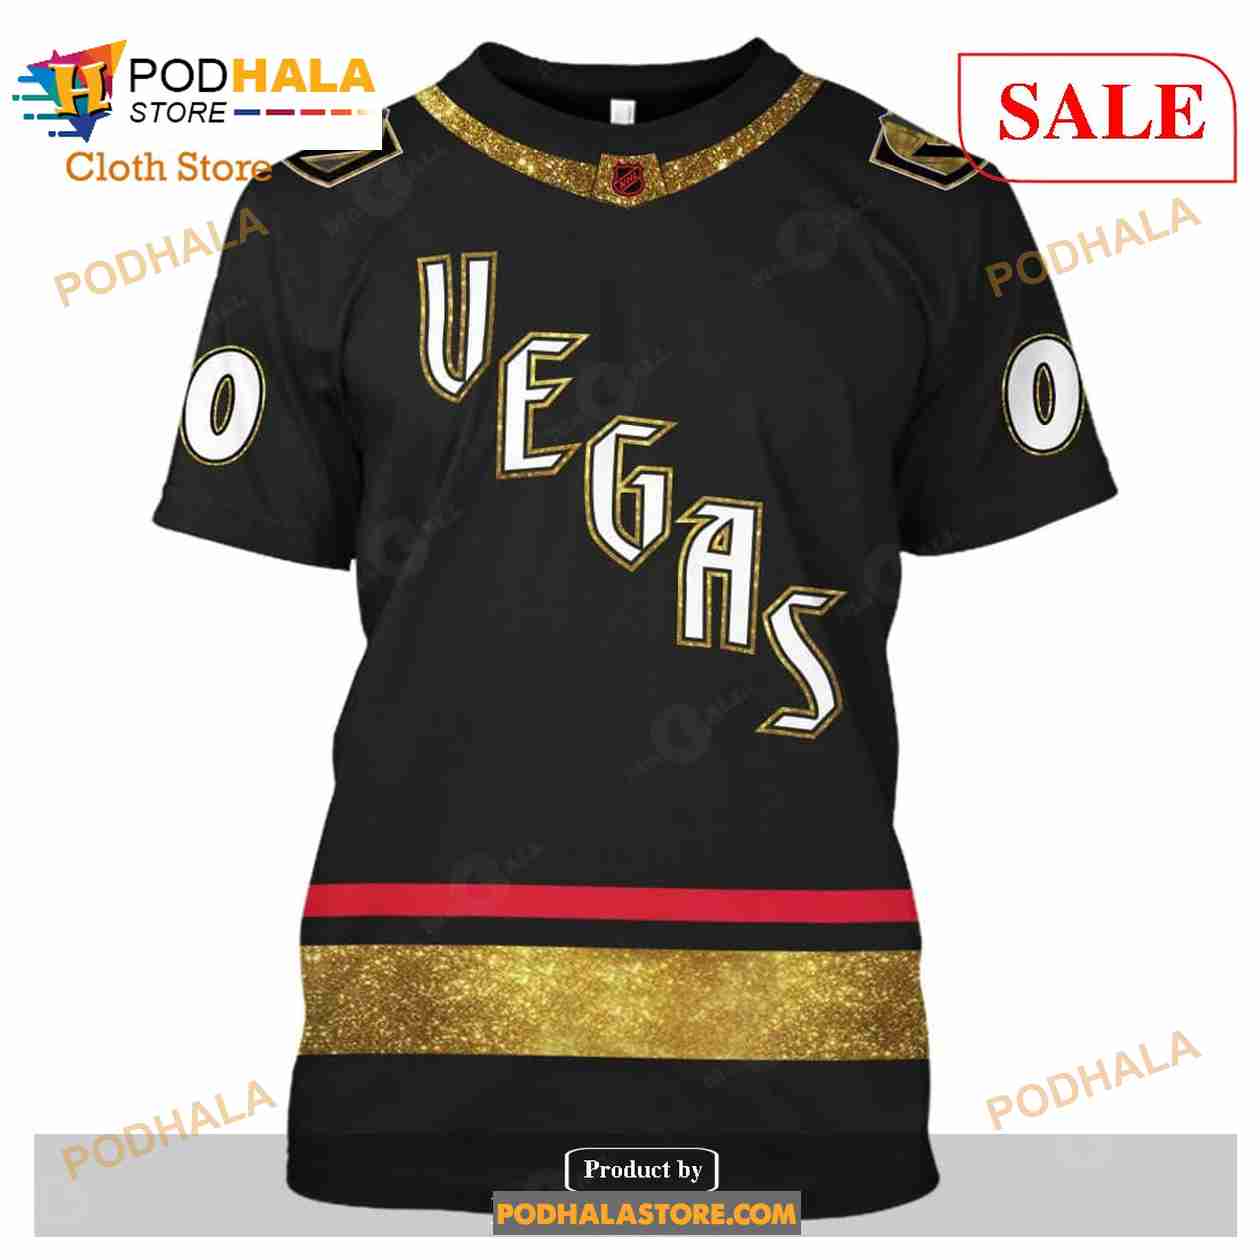 Vegas Golden Knights merchandise top selling in NHL